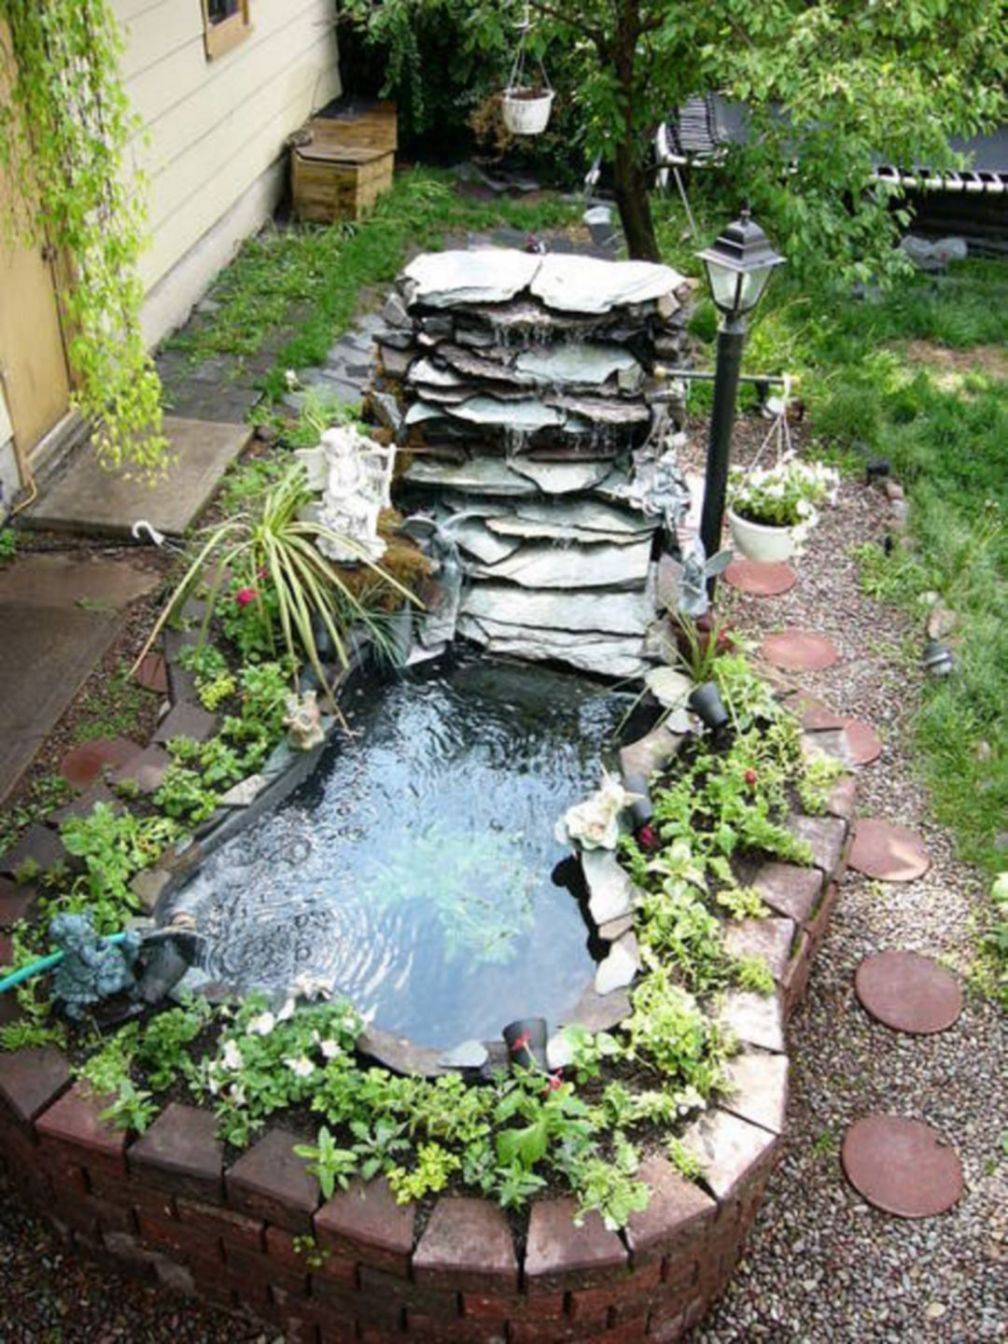 Your Customers Dream Pond